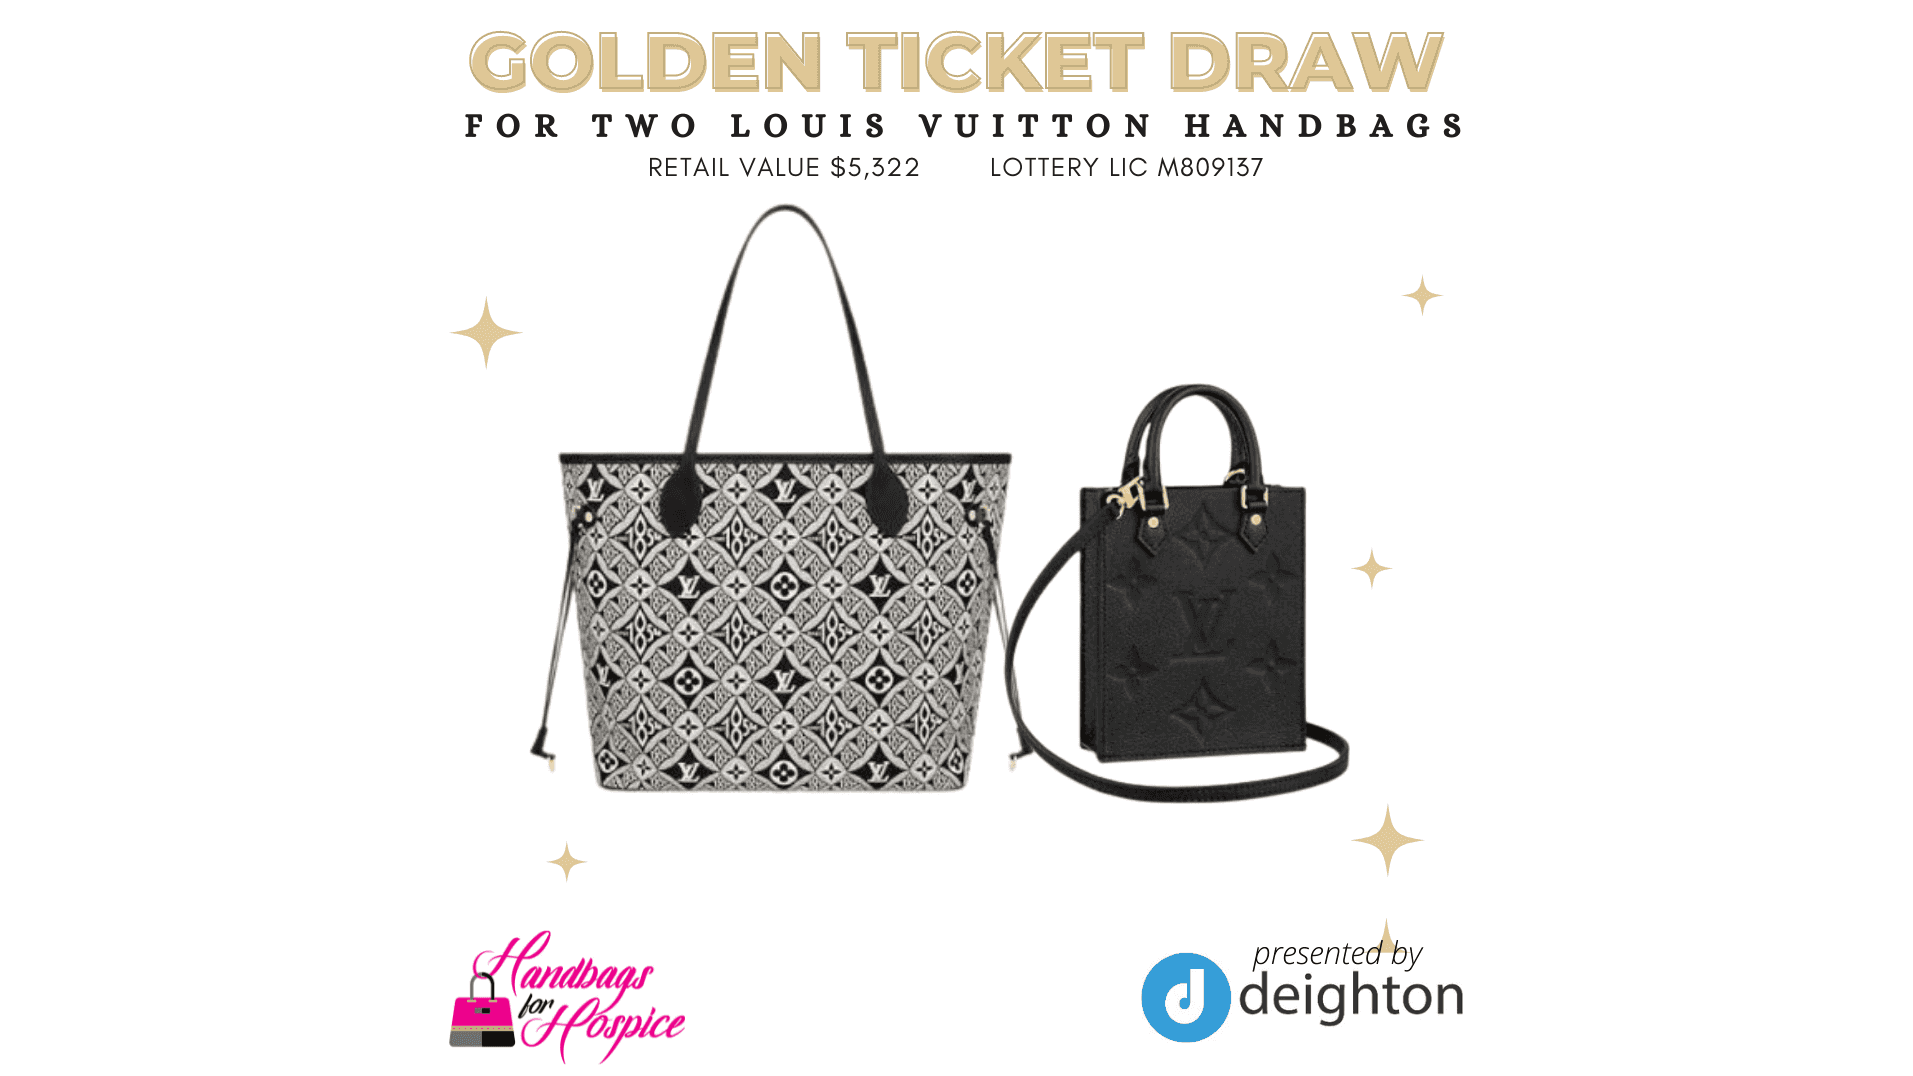 Golden Ticket Draw for Two Louis Vuitton Handbags